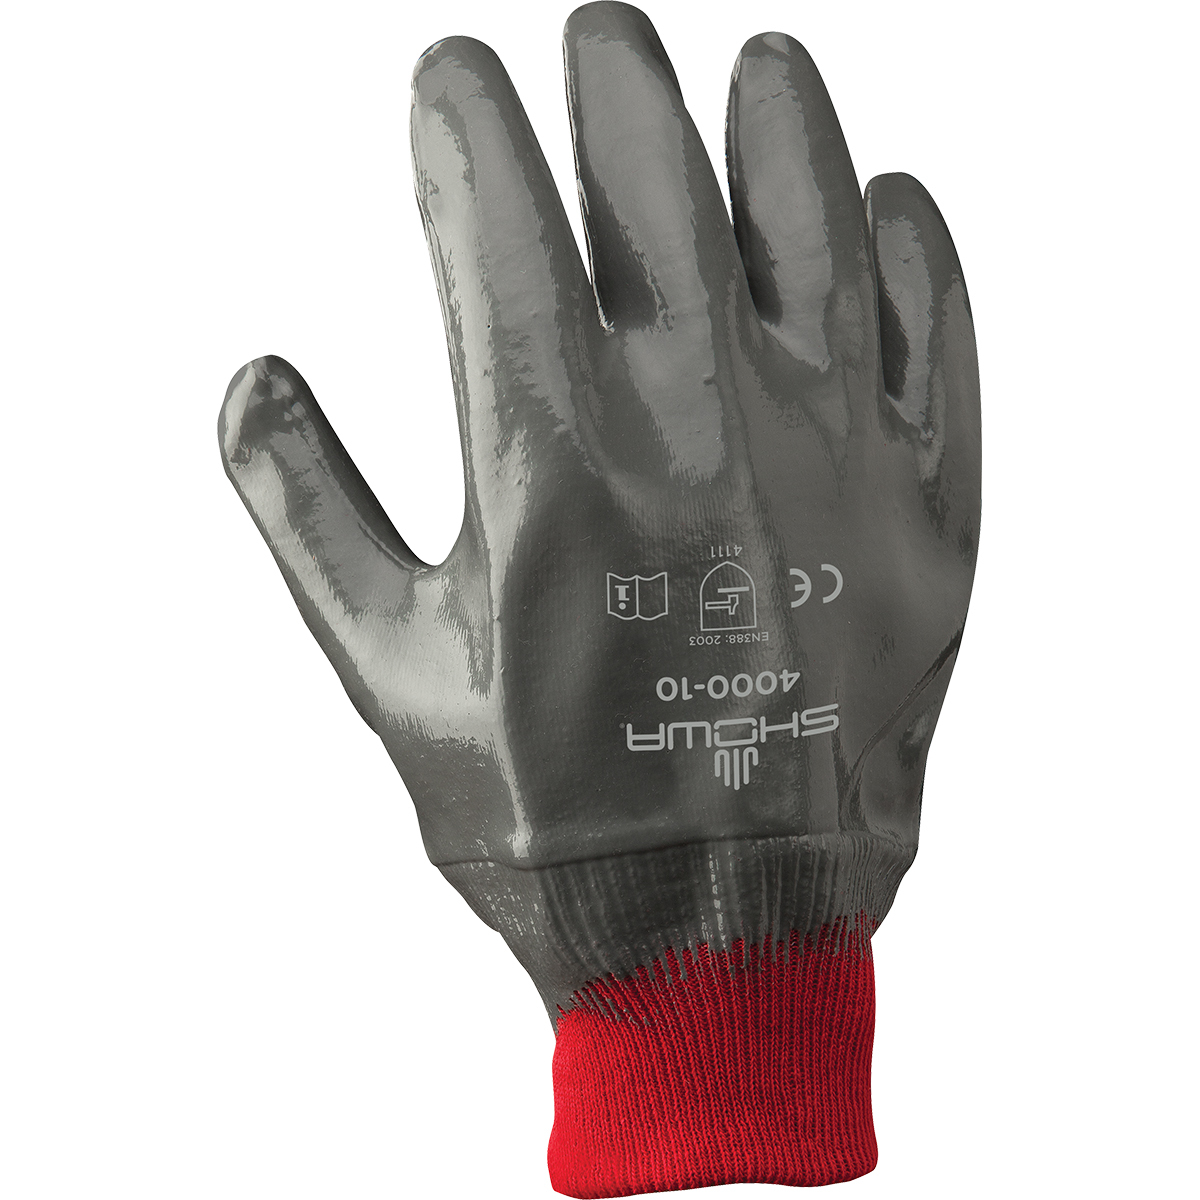 SHOWA® Light Weight Nitrile Full Hand Coated Work Gloves With Cotton Liner And Knit Wrist